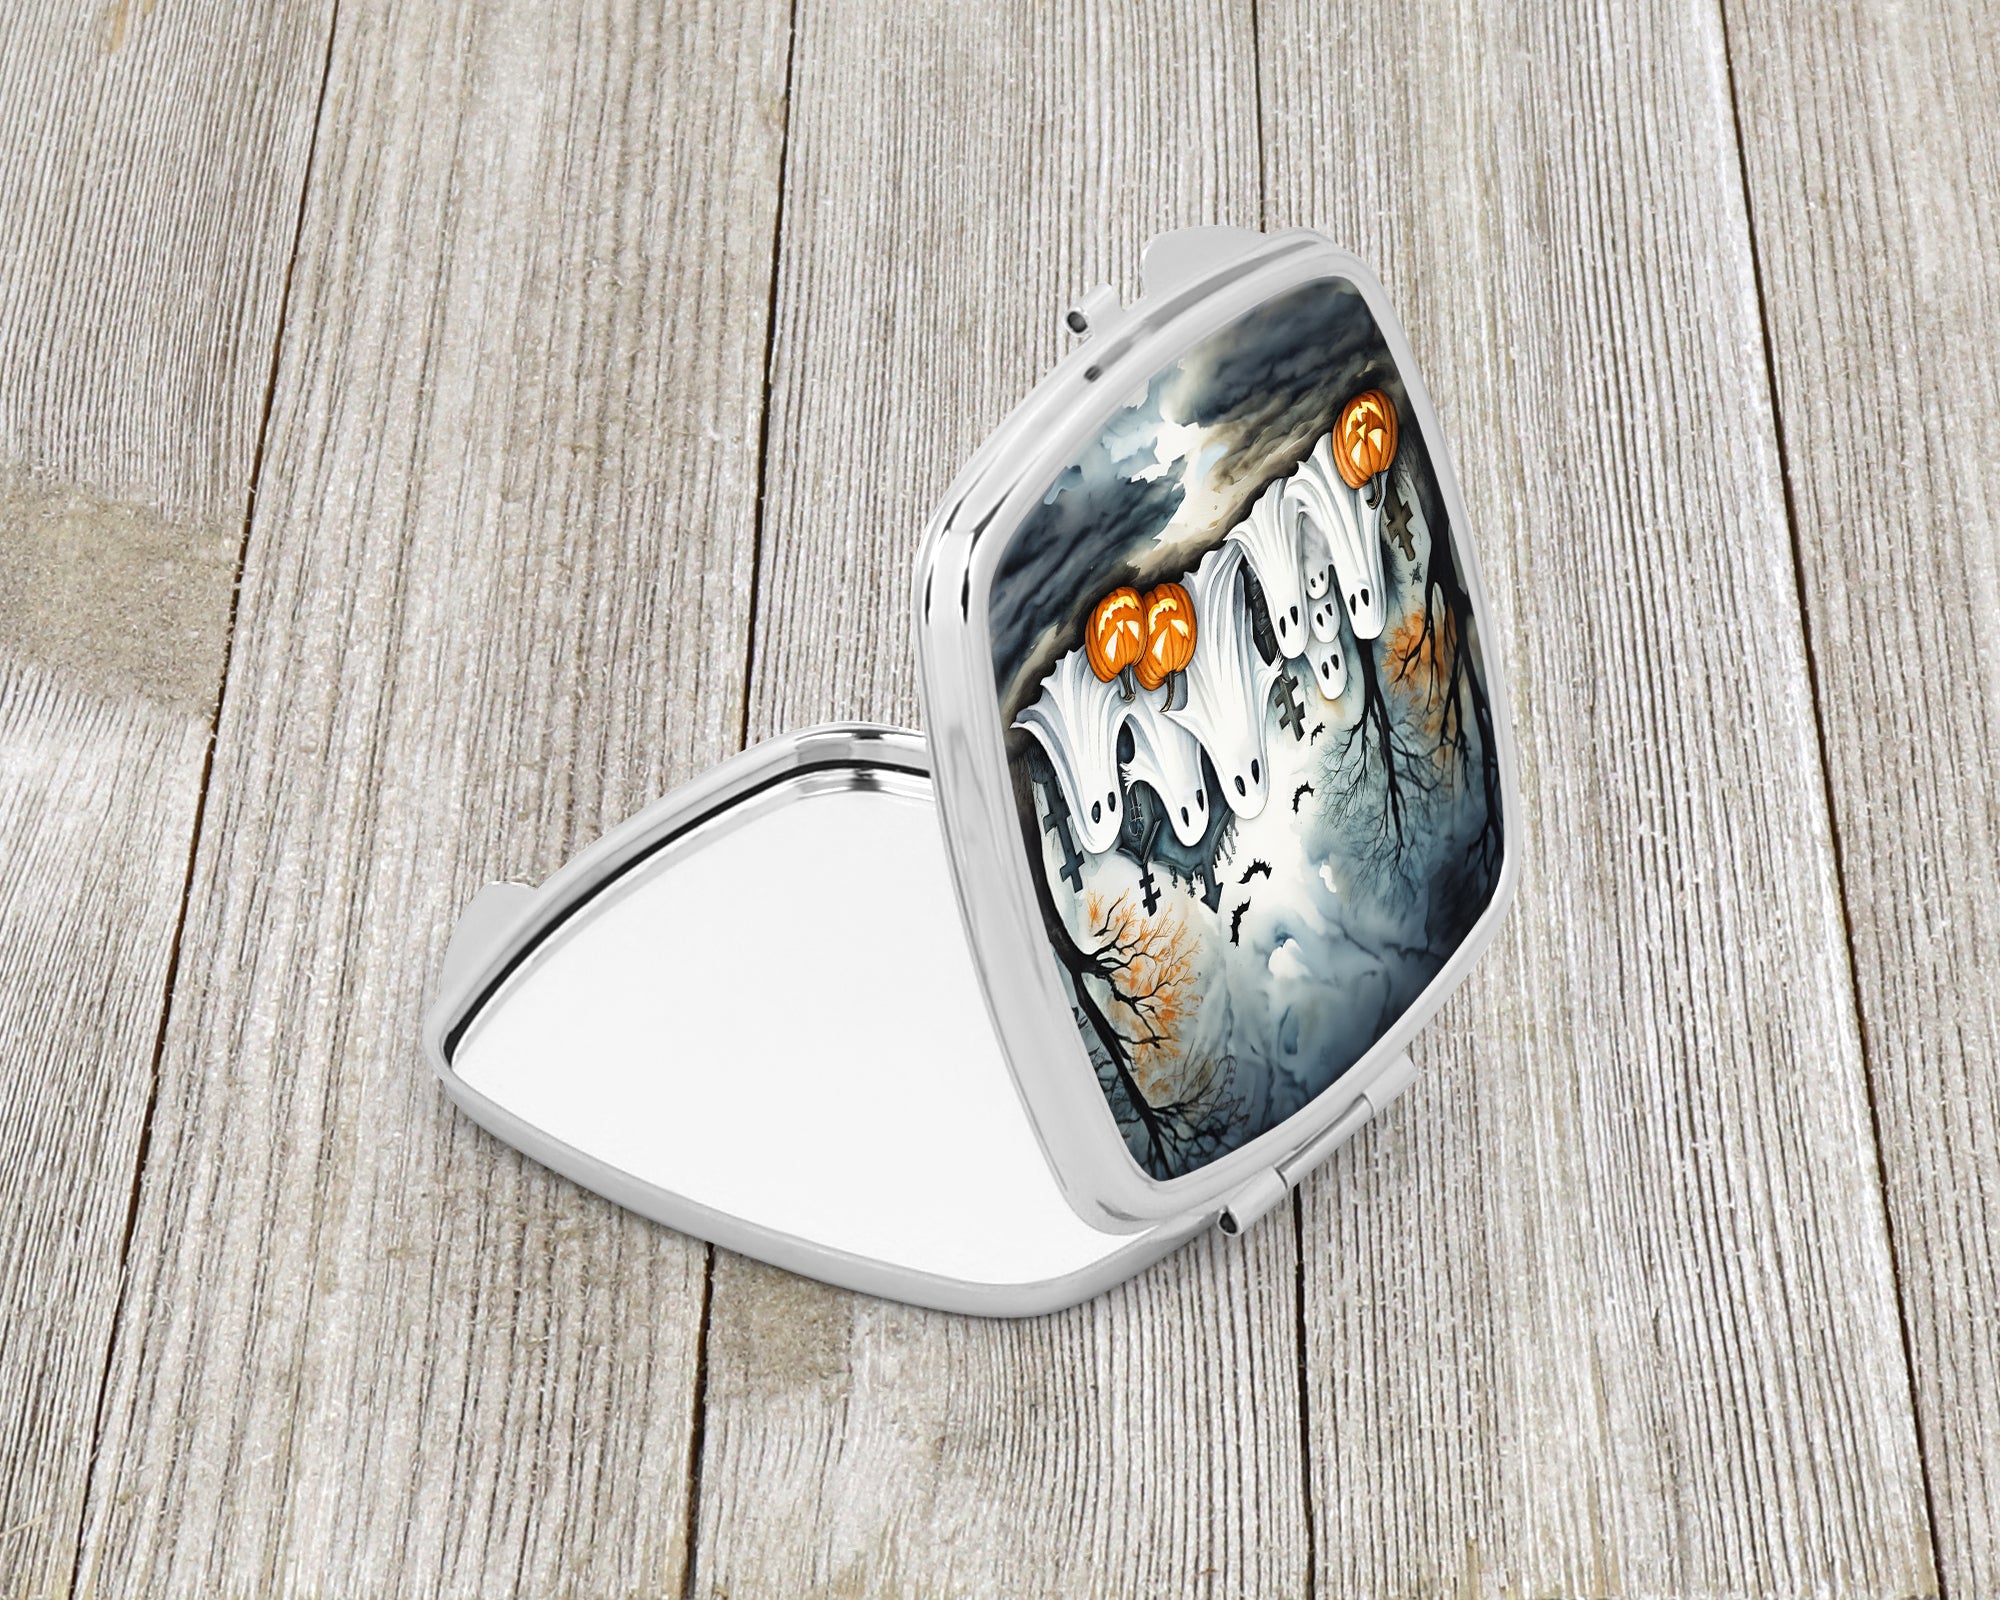 Buy this Ghosts Spooky Halloween Compact Mirror